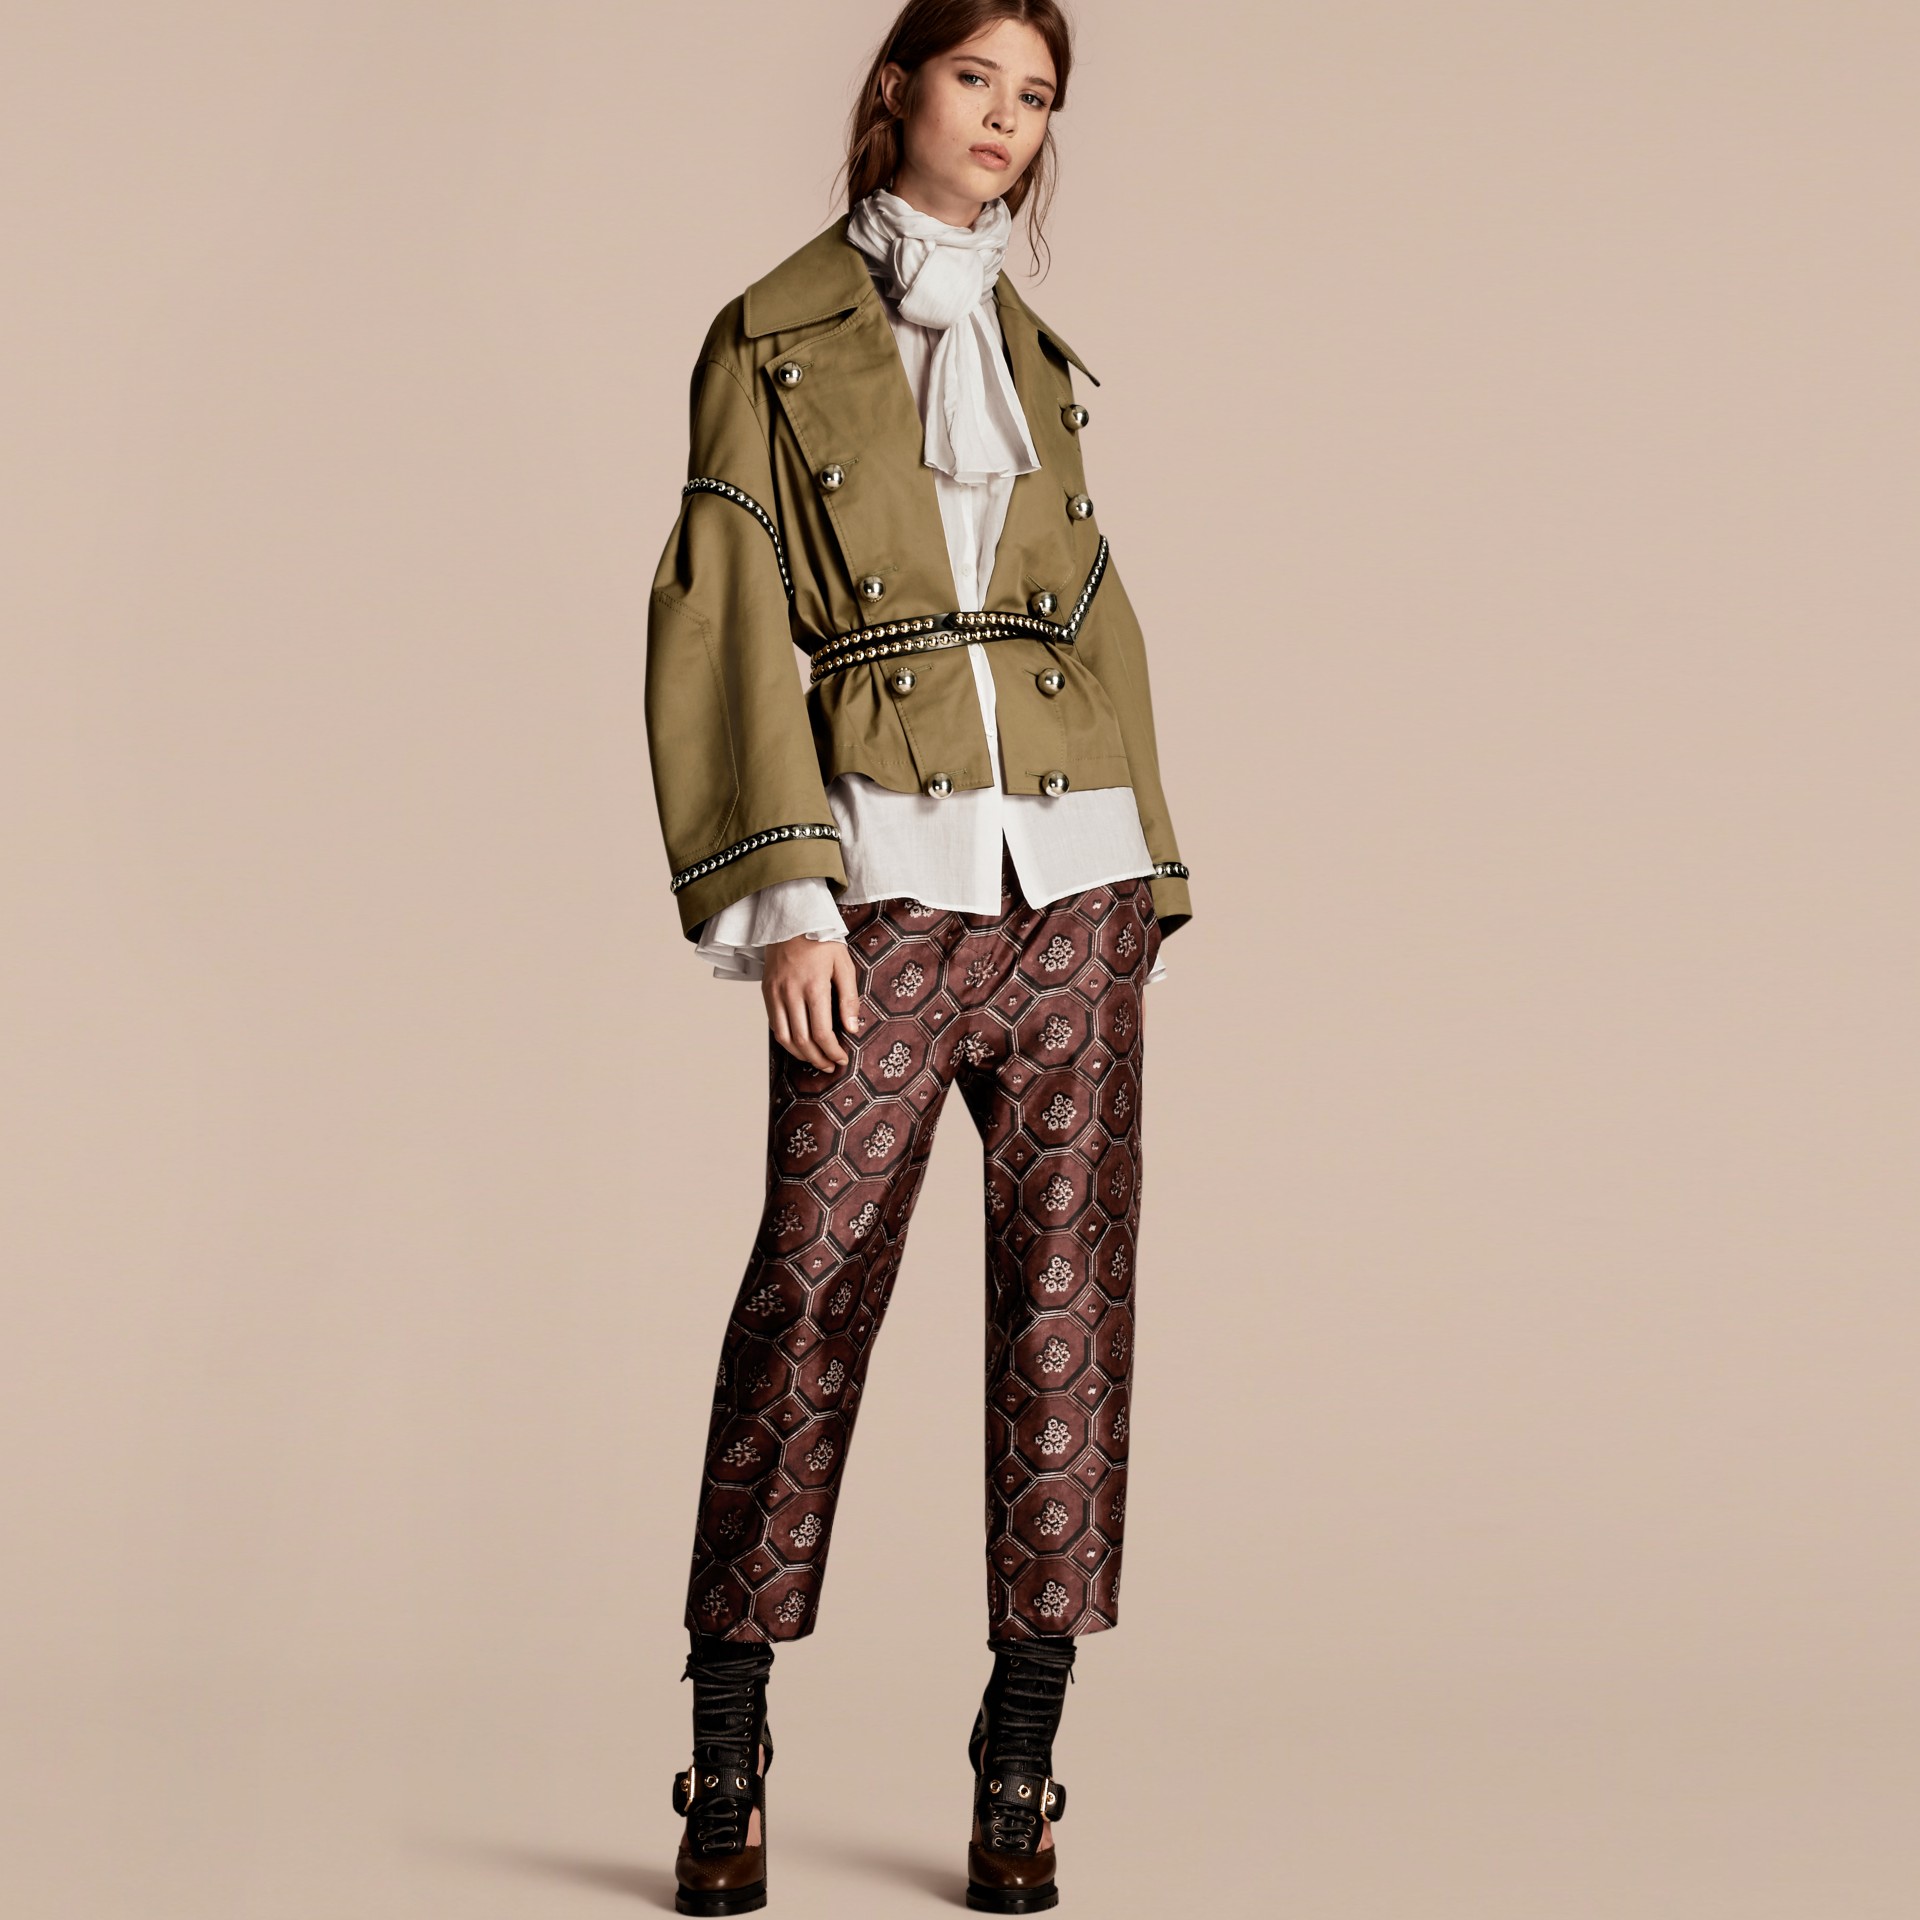 Stretch Cotton Military Jacket in Sage - Women | Burberry United States